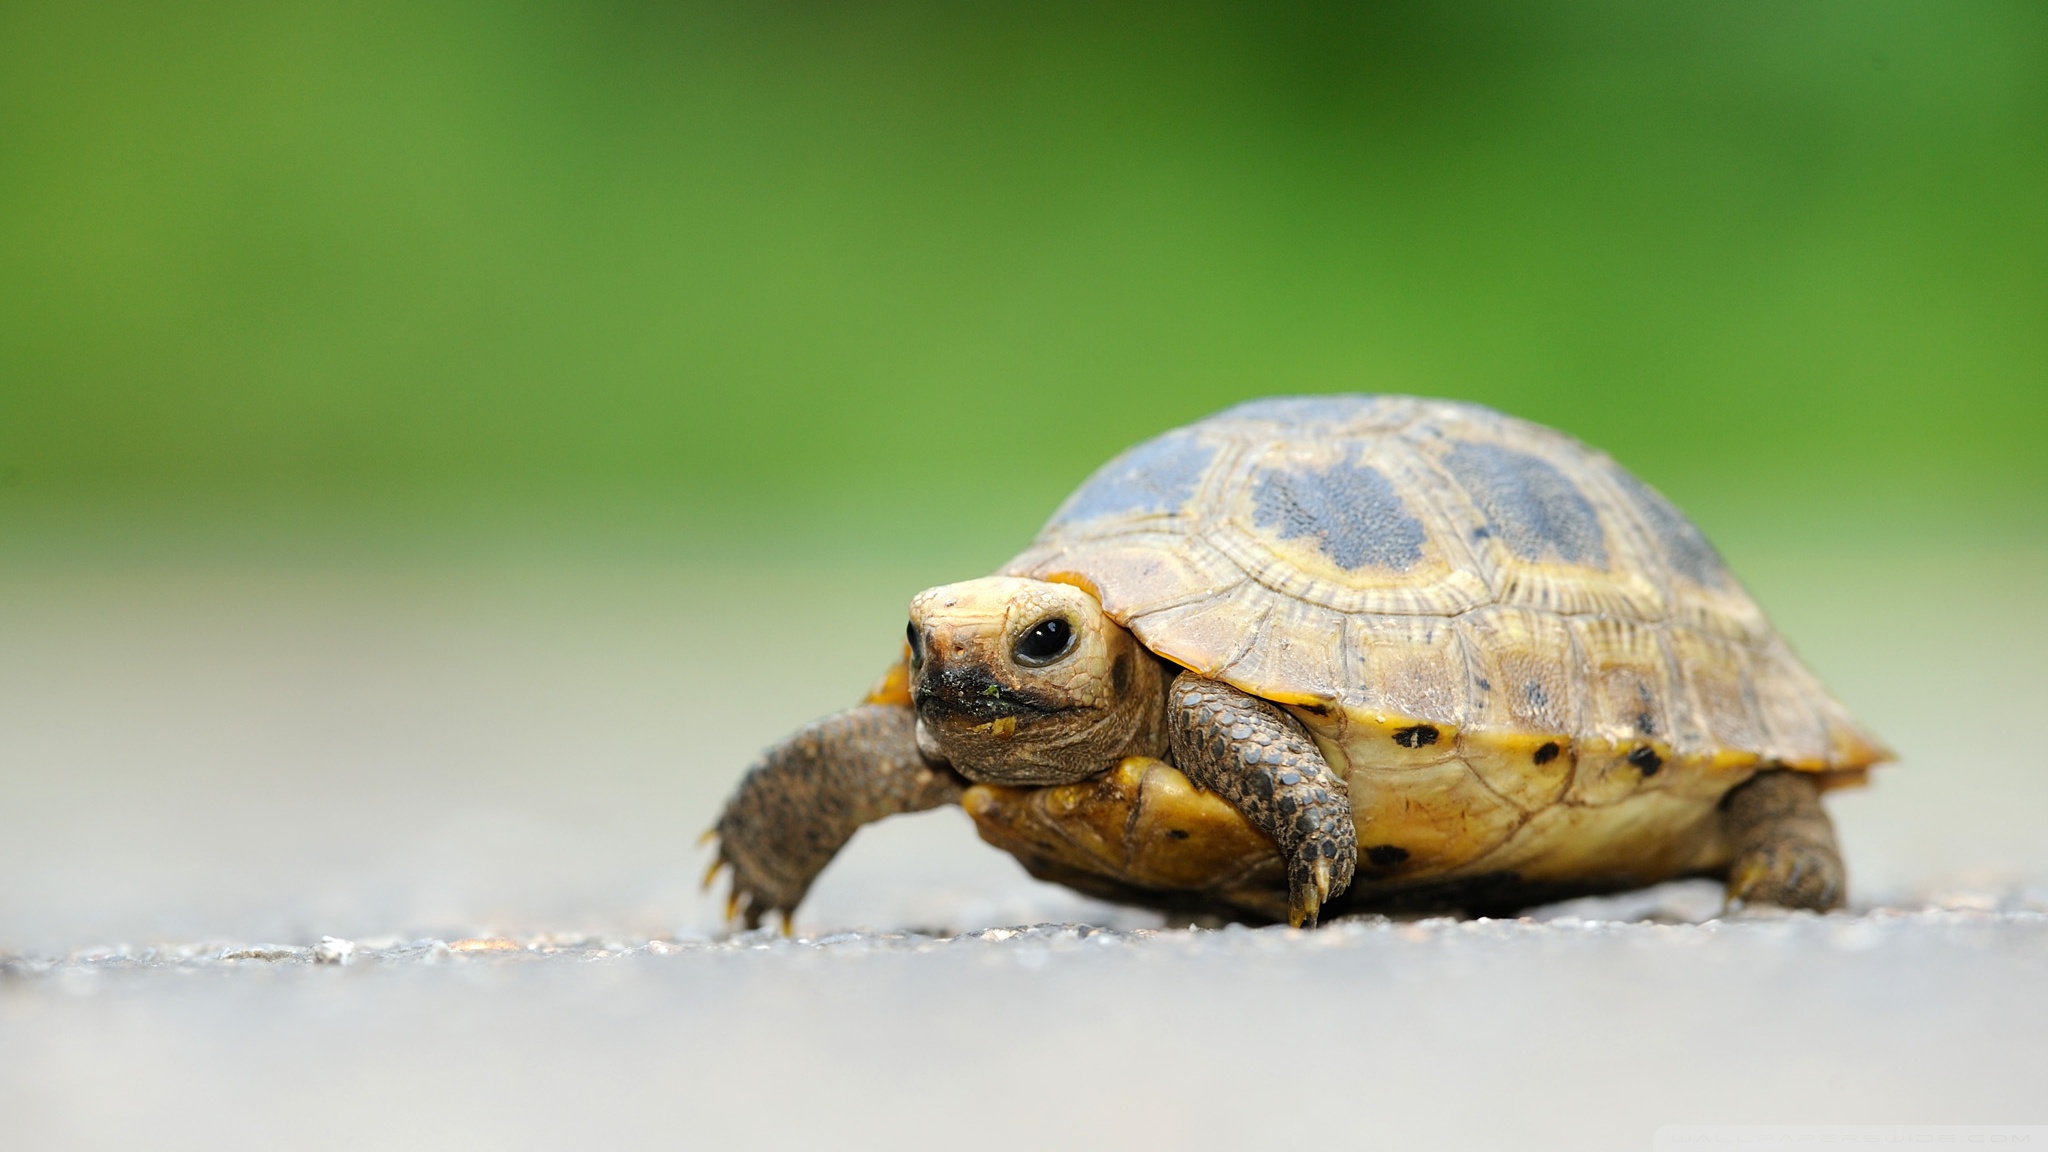 Cute Tortoise Wallpaper Image In Collection